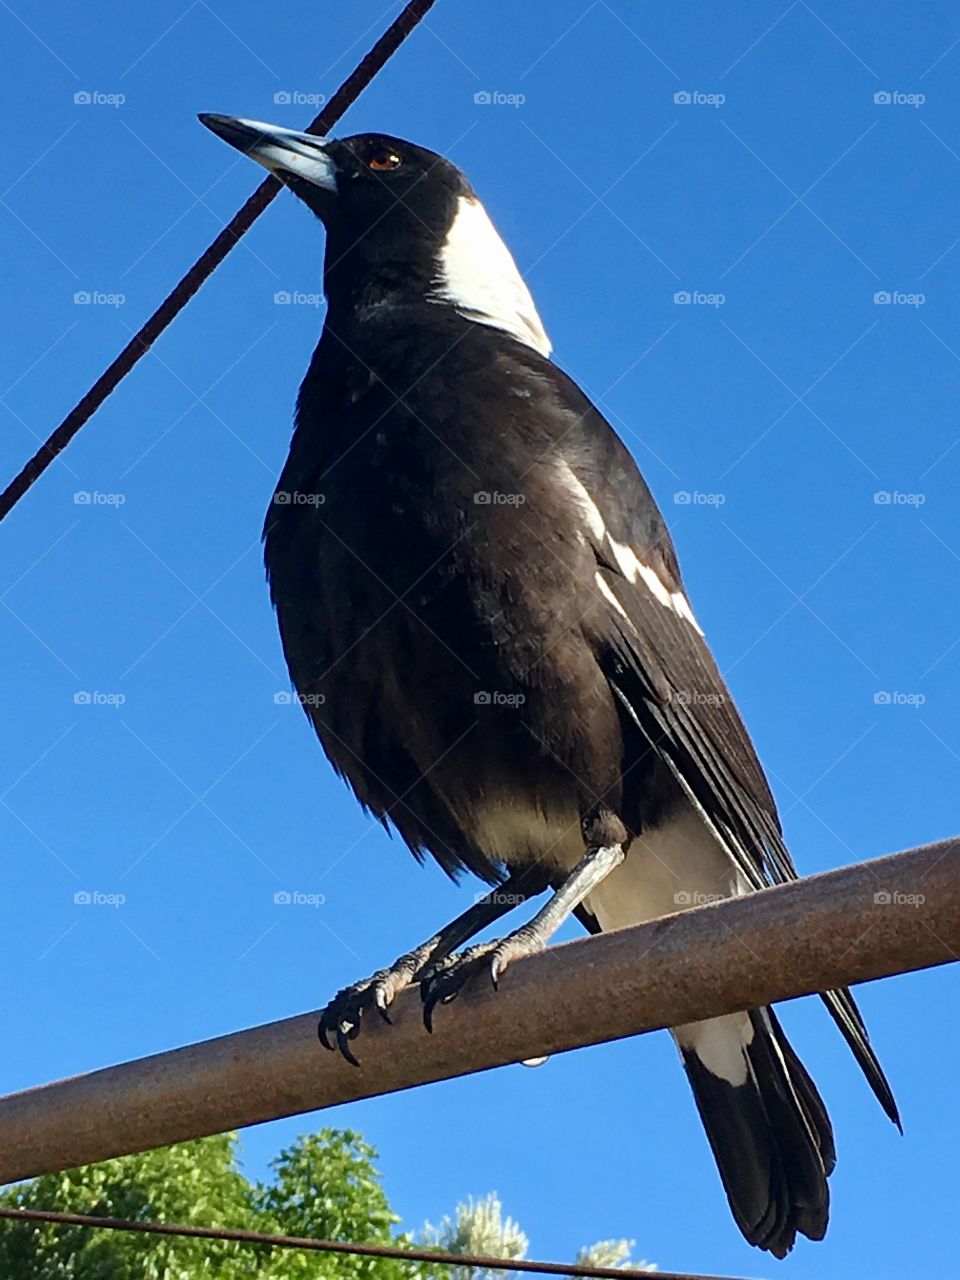 Closeup view magpie bird on a rusted wire against a clear blue sky